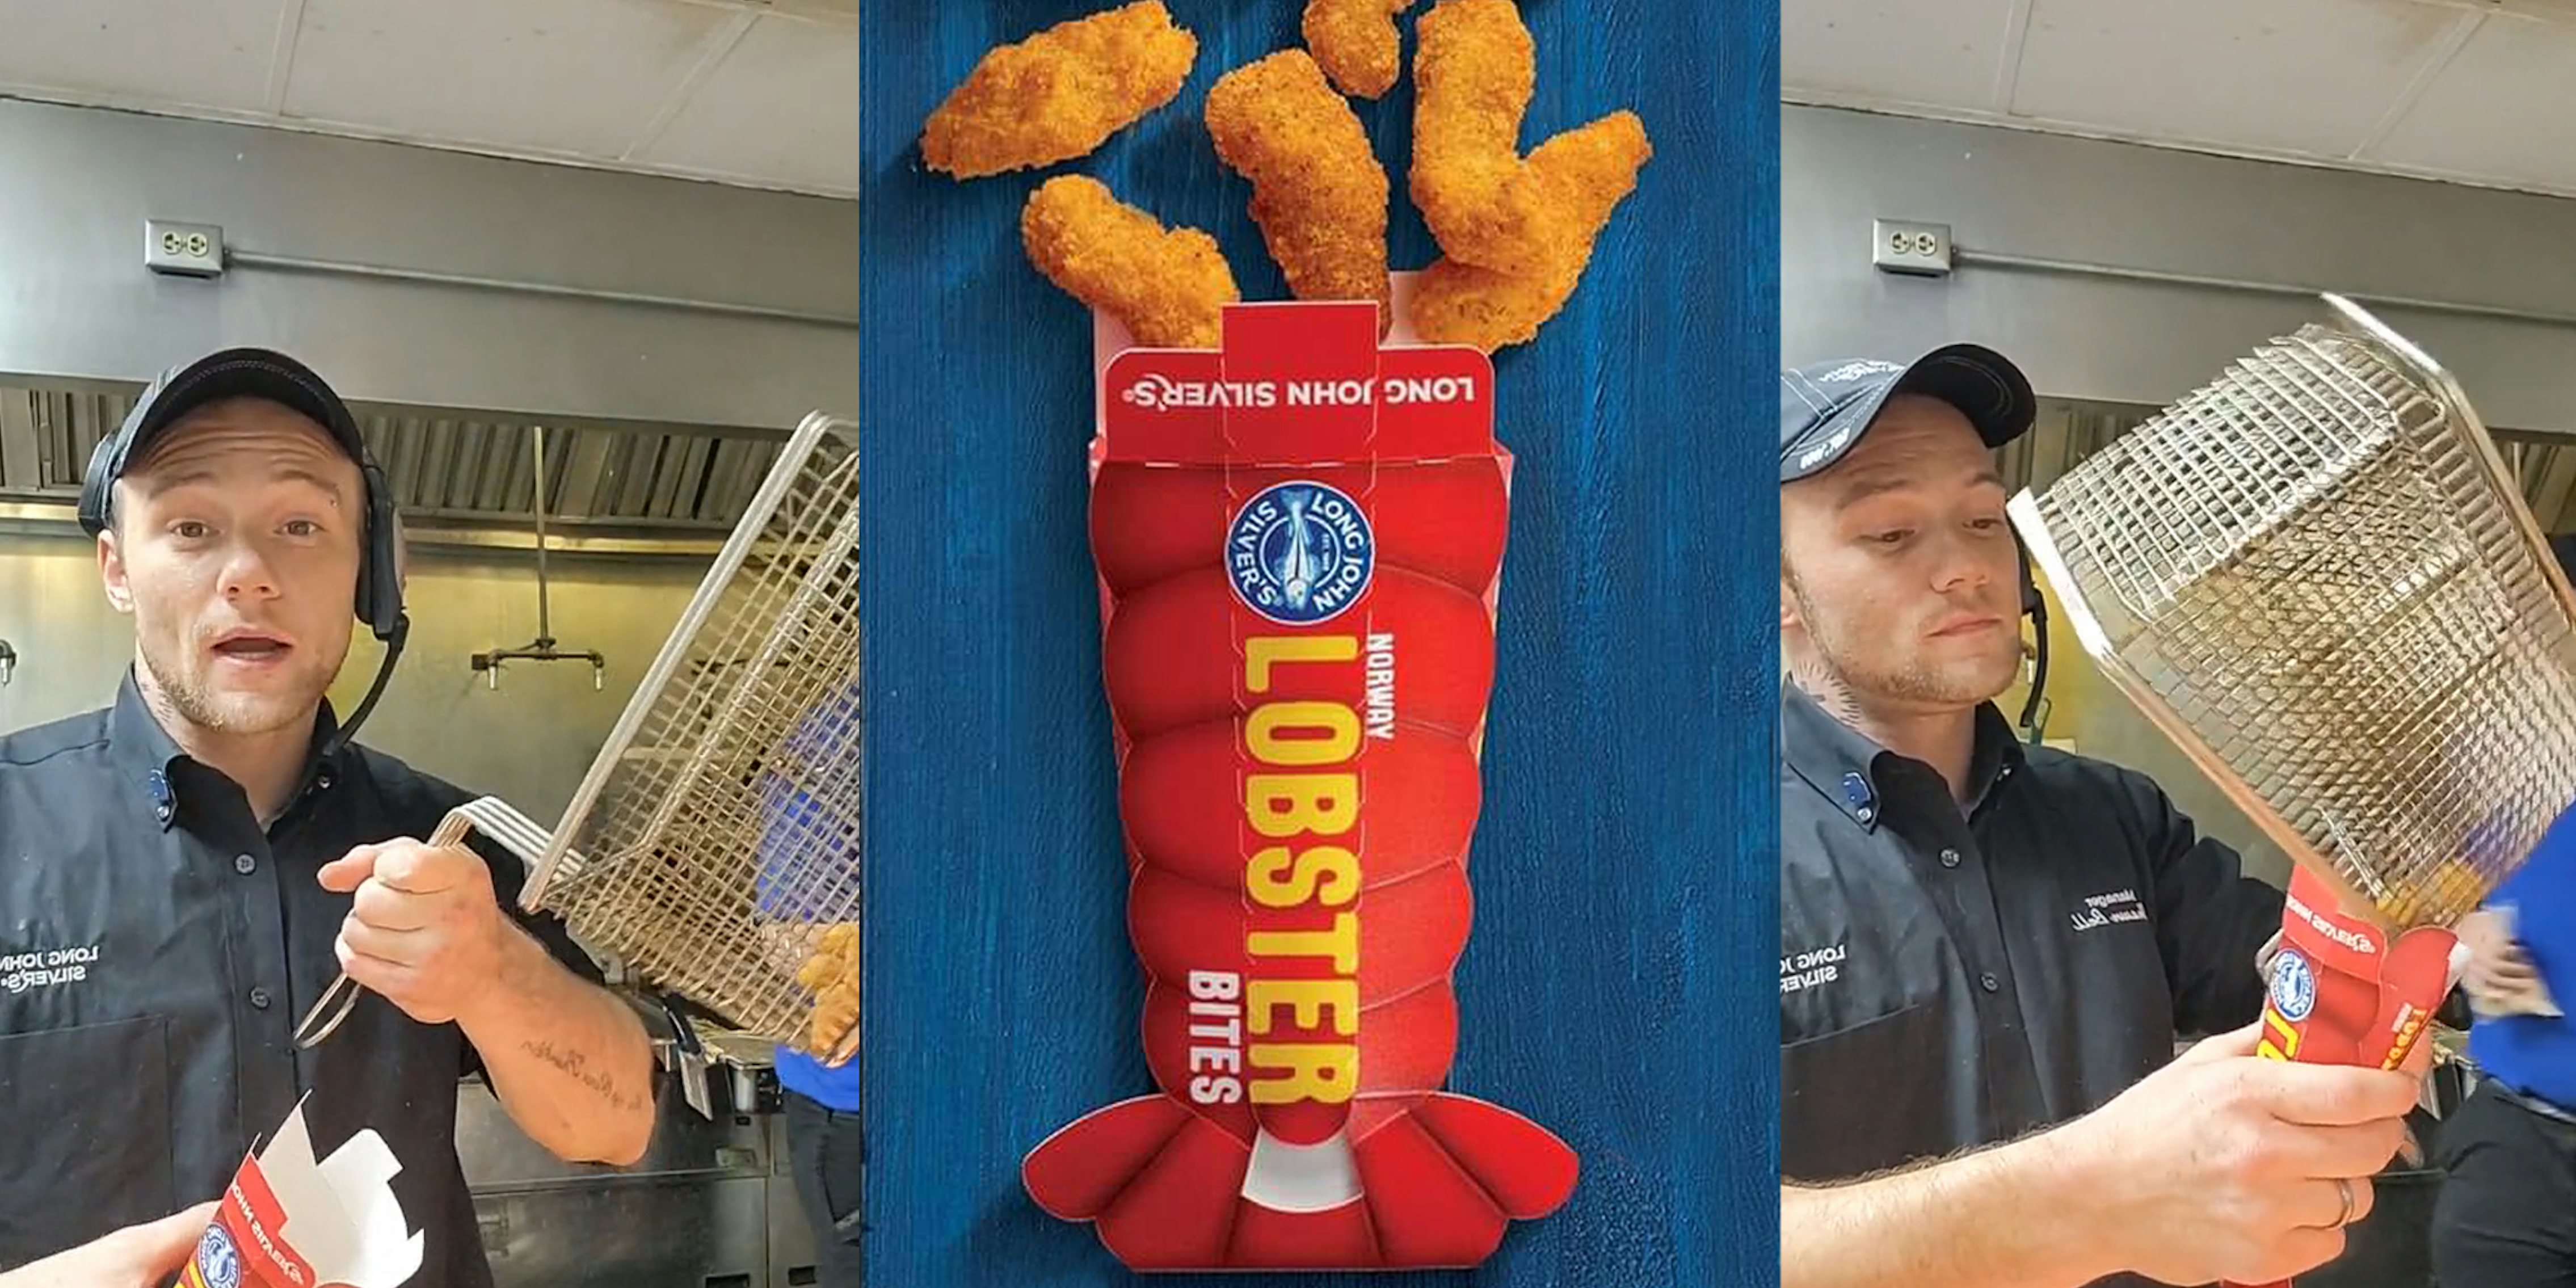 Long John Silver's employee holding frying tray up to package for lobster bites (l) Long John Silver's lobster bites on blue wooden surface (c) Long John Silver's employee dumping frying tray with lobster bites into lobster bites packaging (r)